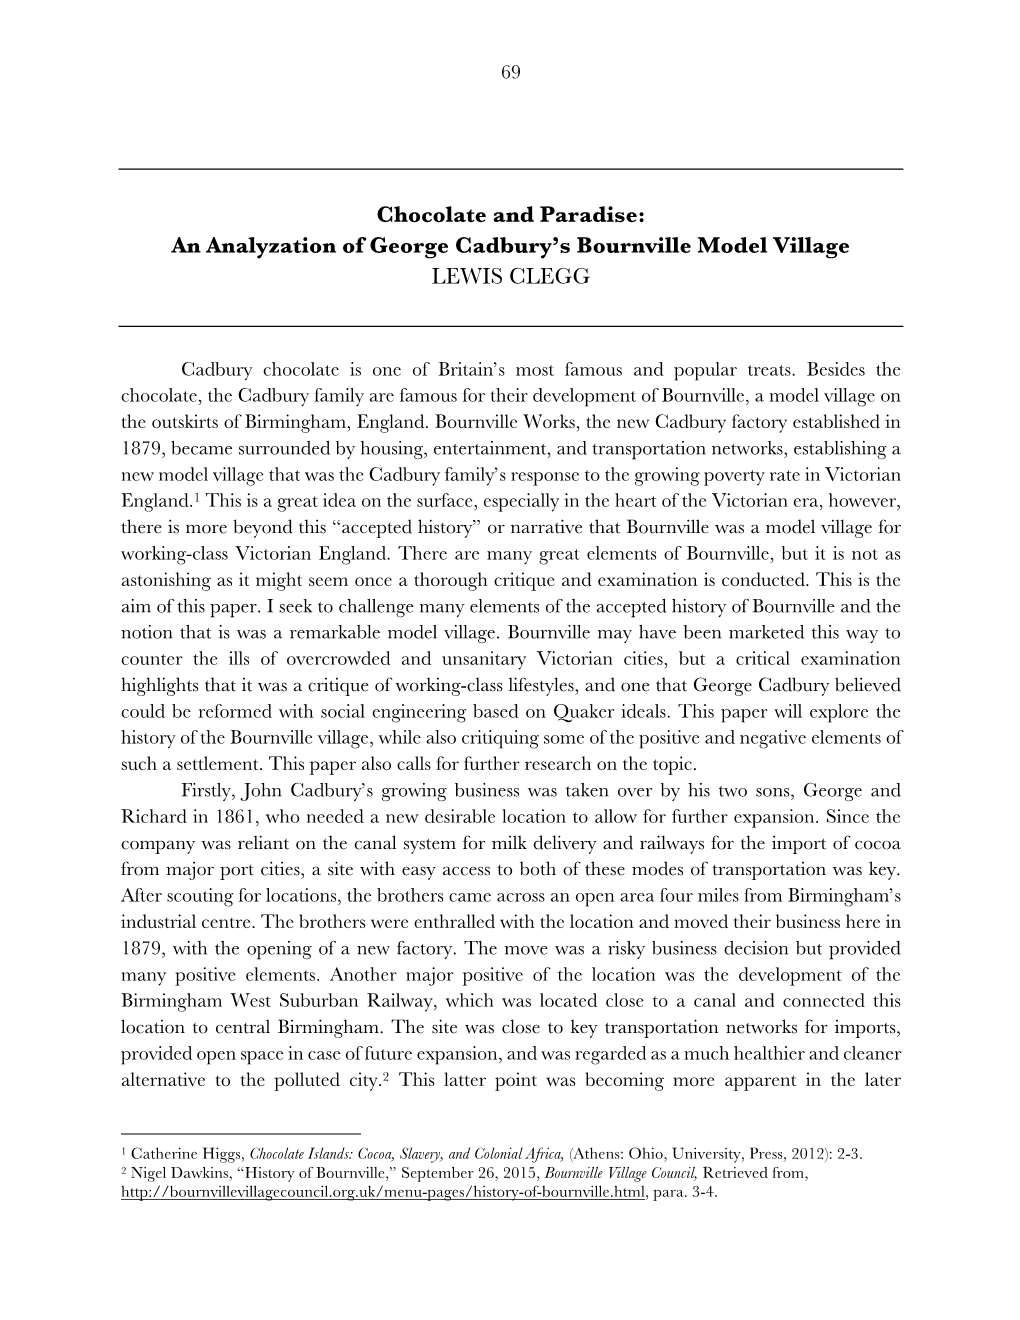 Chocolate and Paradise: an Analyzation of George Cadbury’S Bournville Model Village LEWIS CLEGG